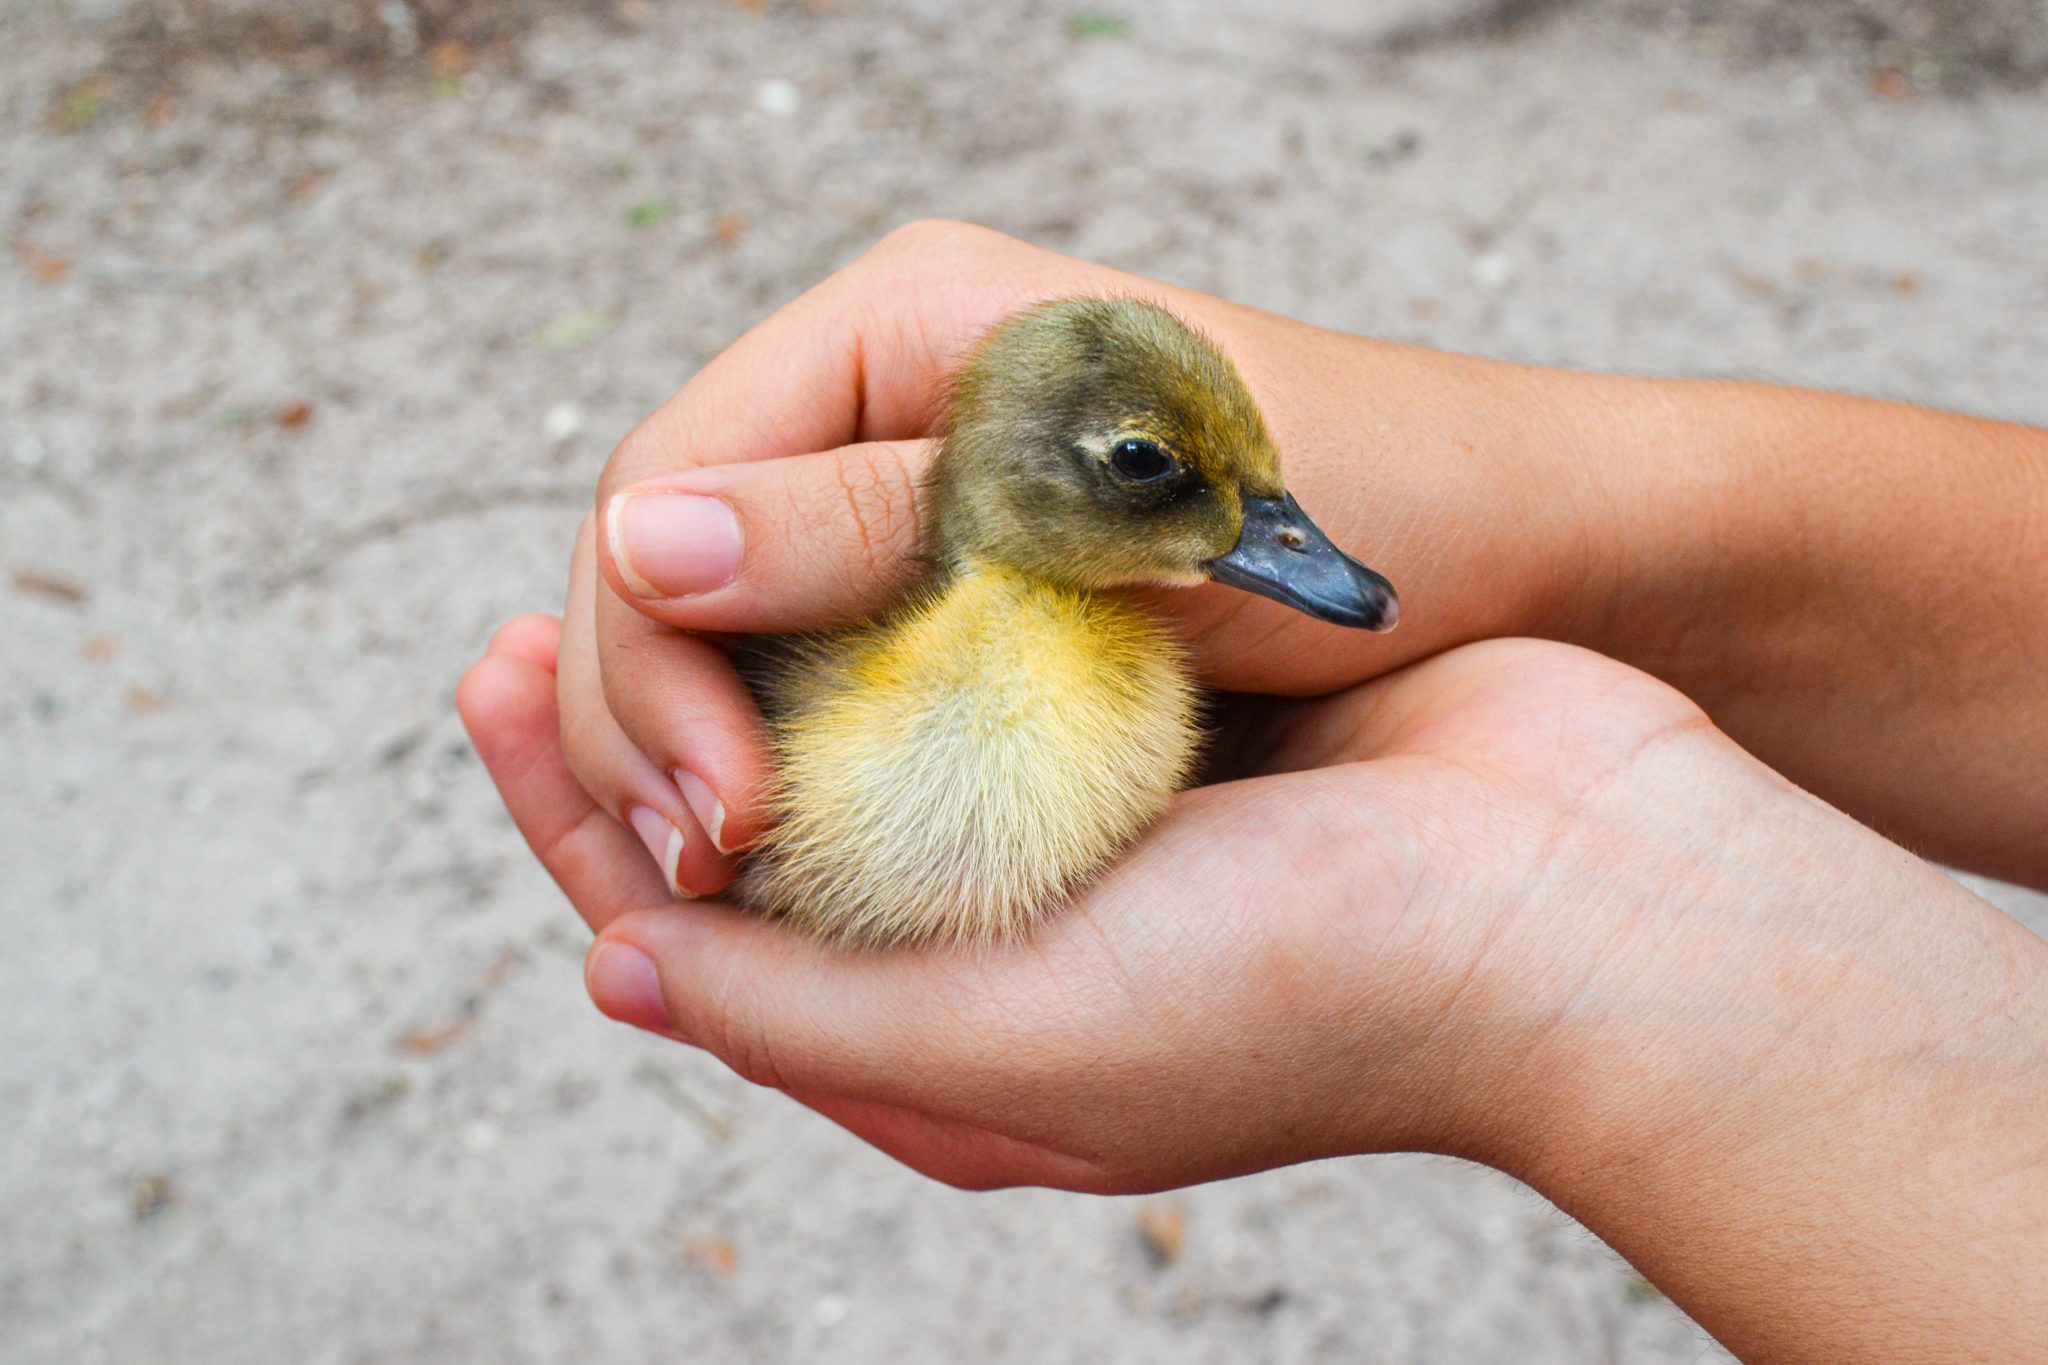 Hands holding a baby duckling